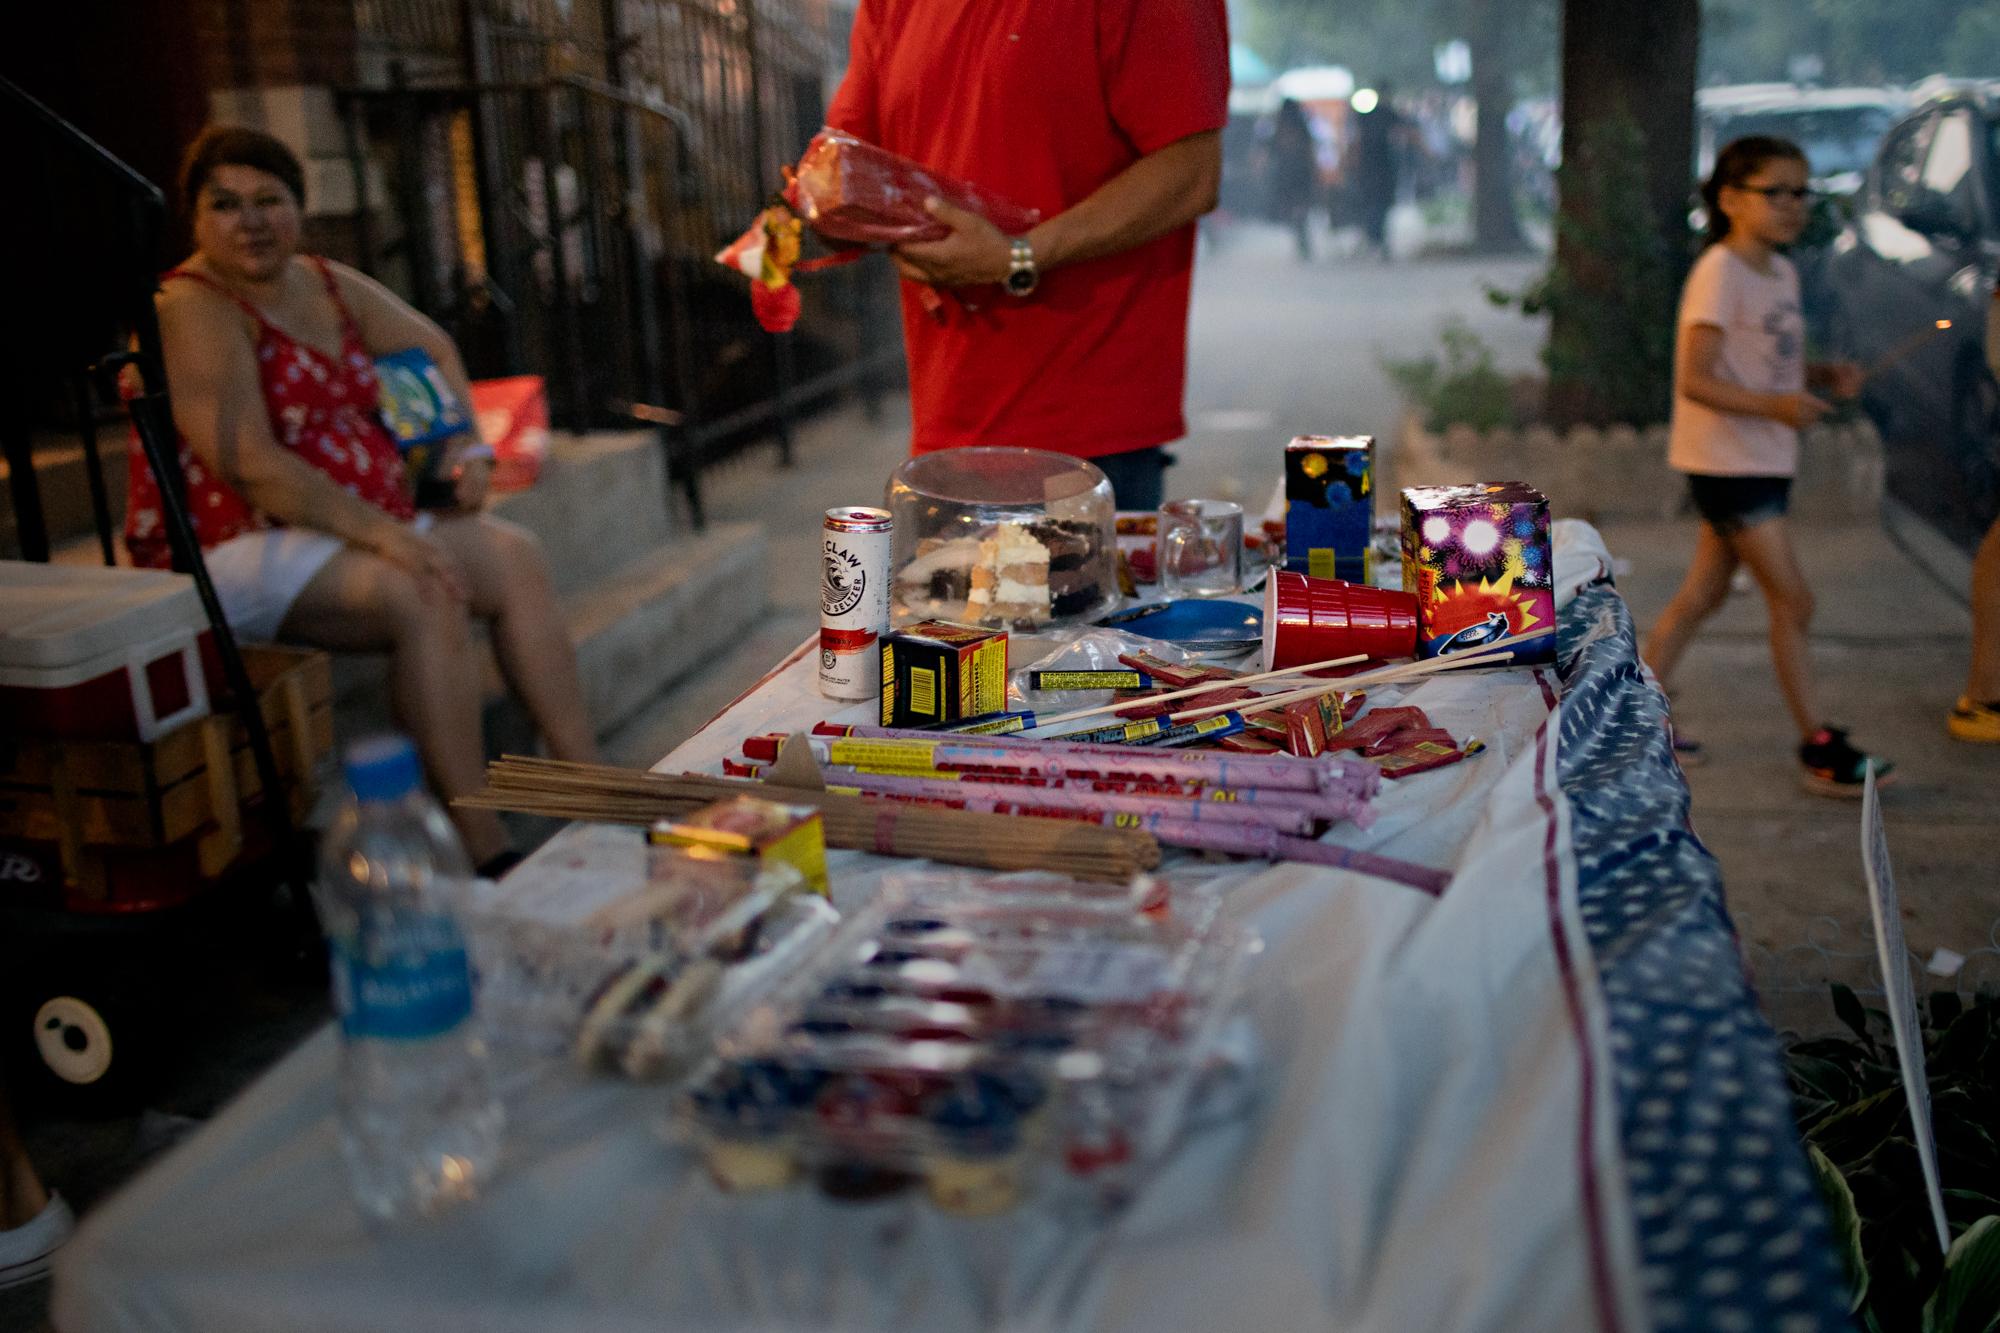 Many blocks in Pilsen have block parties where fireworks, which are still illegal in the City of Chicago, are prepared to be fired as the night progresses.